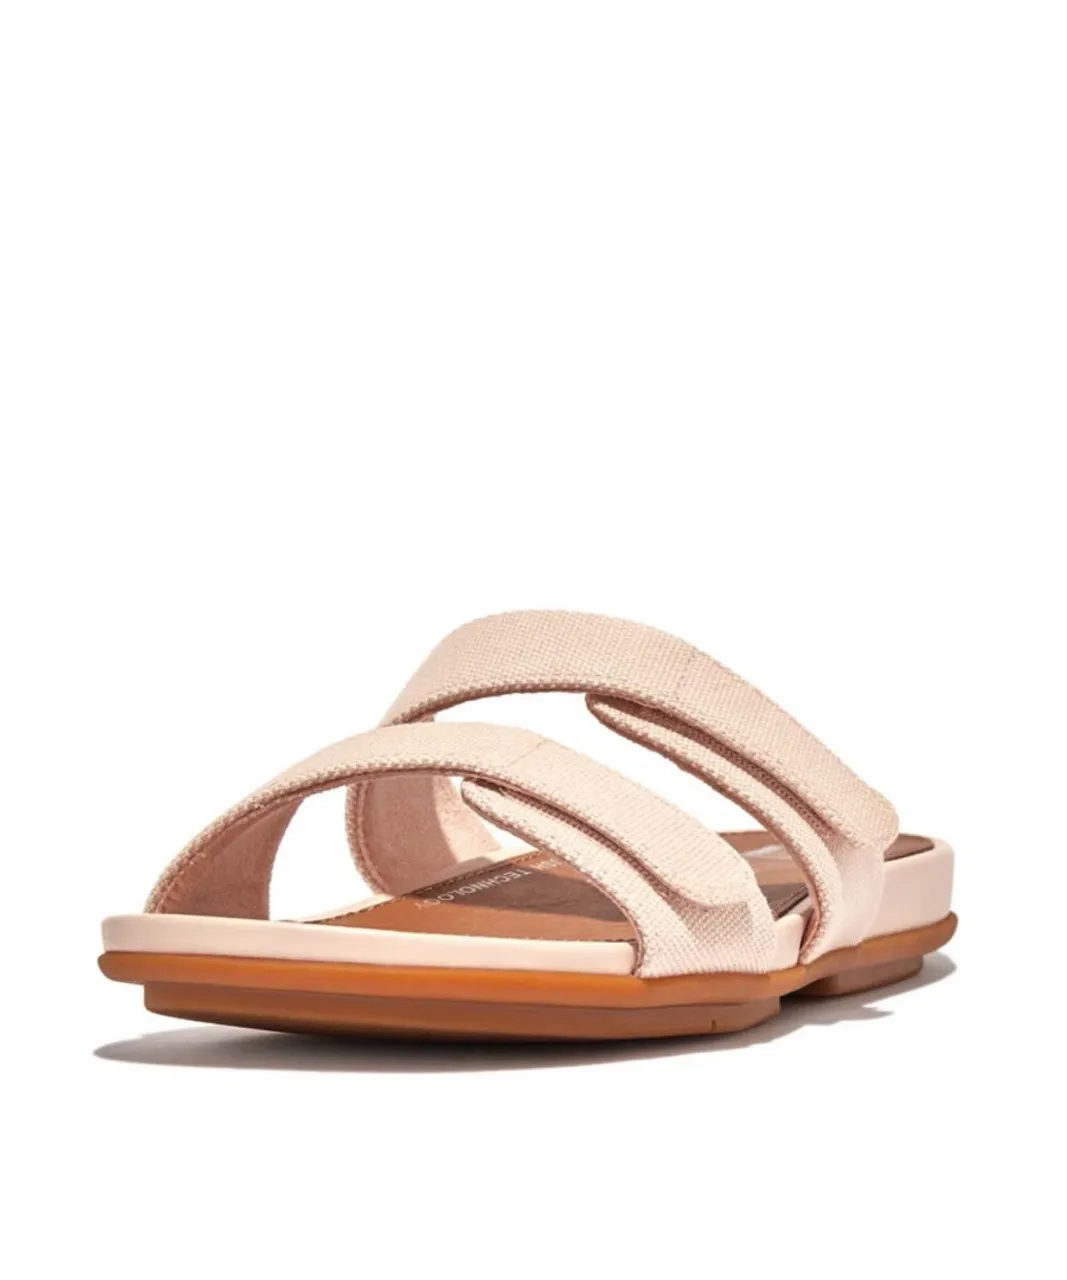 Fitflop Womenss Fit Flop Gracie Adjustable Canvas Slide Sandals in Rose Leather (archived)